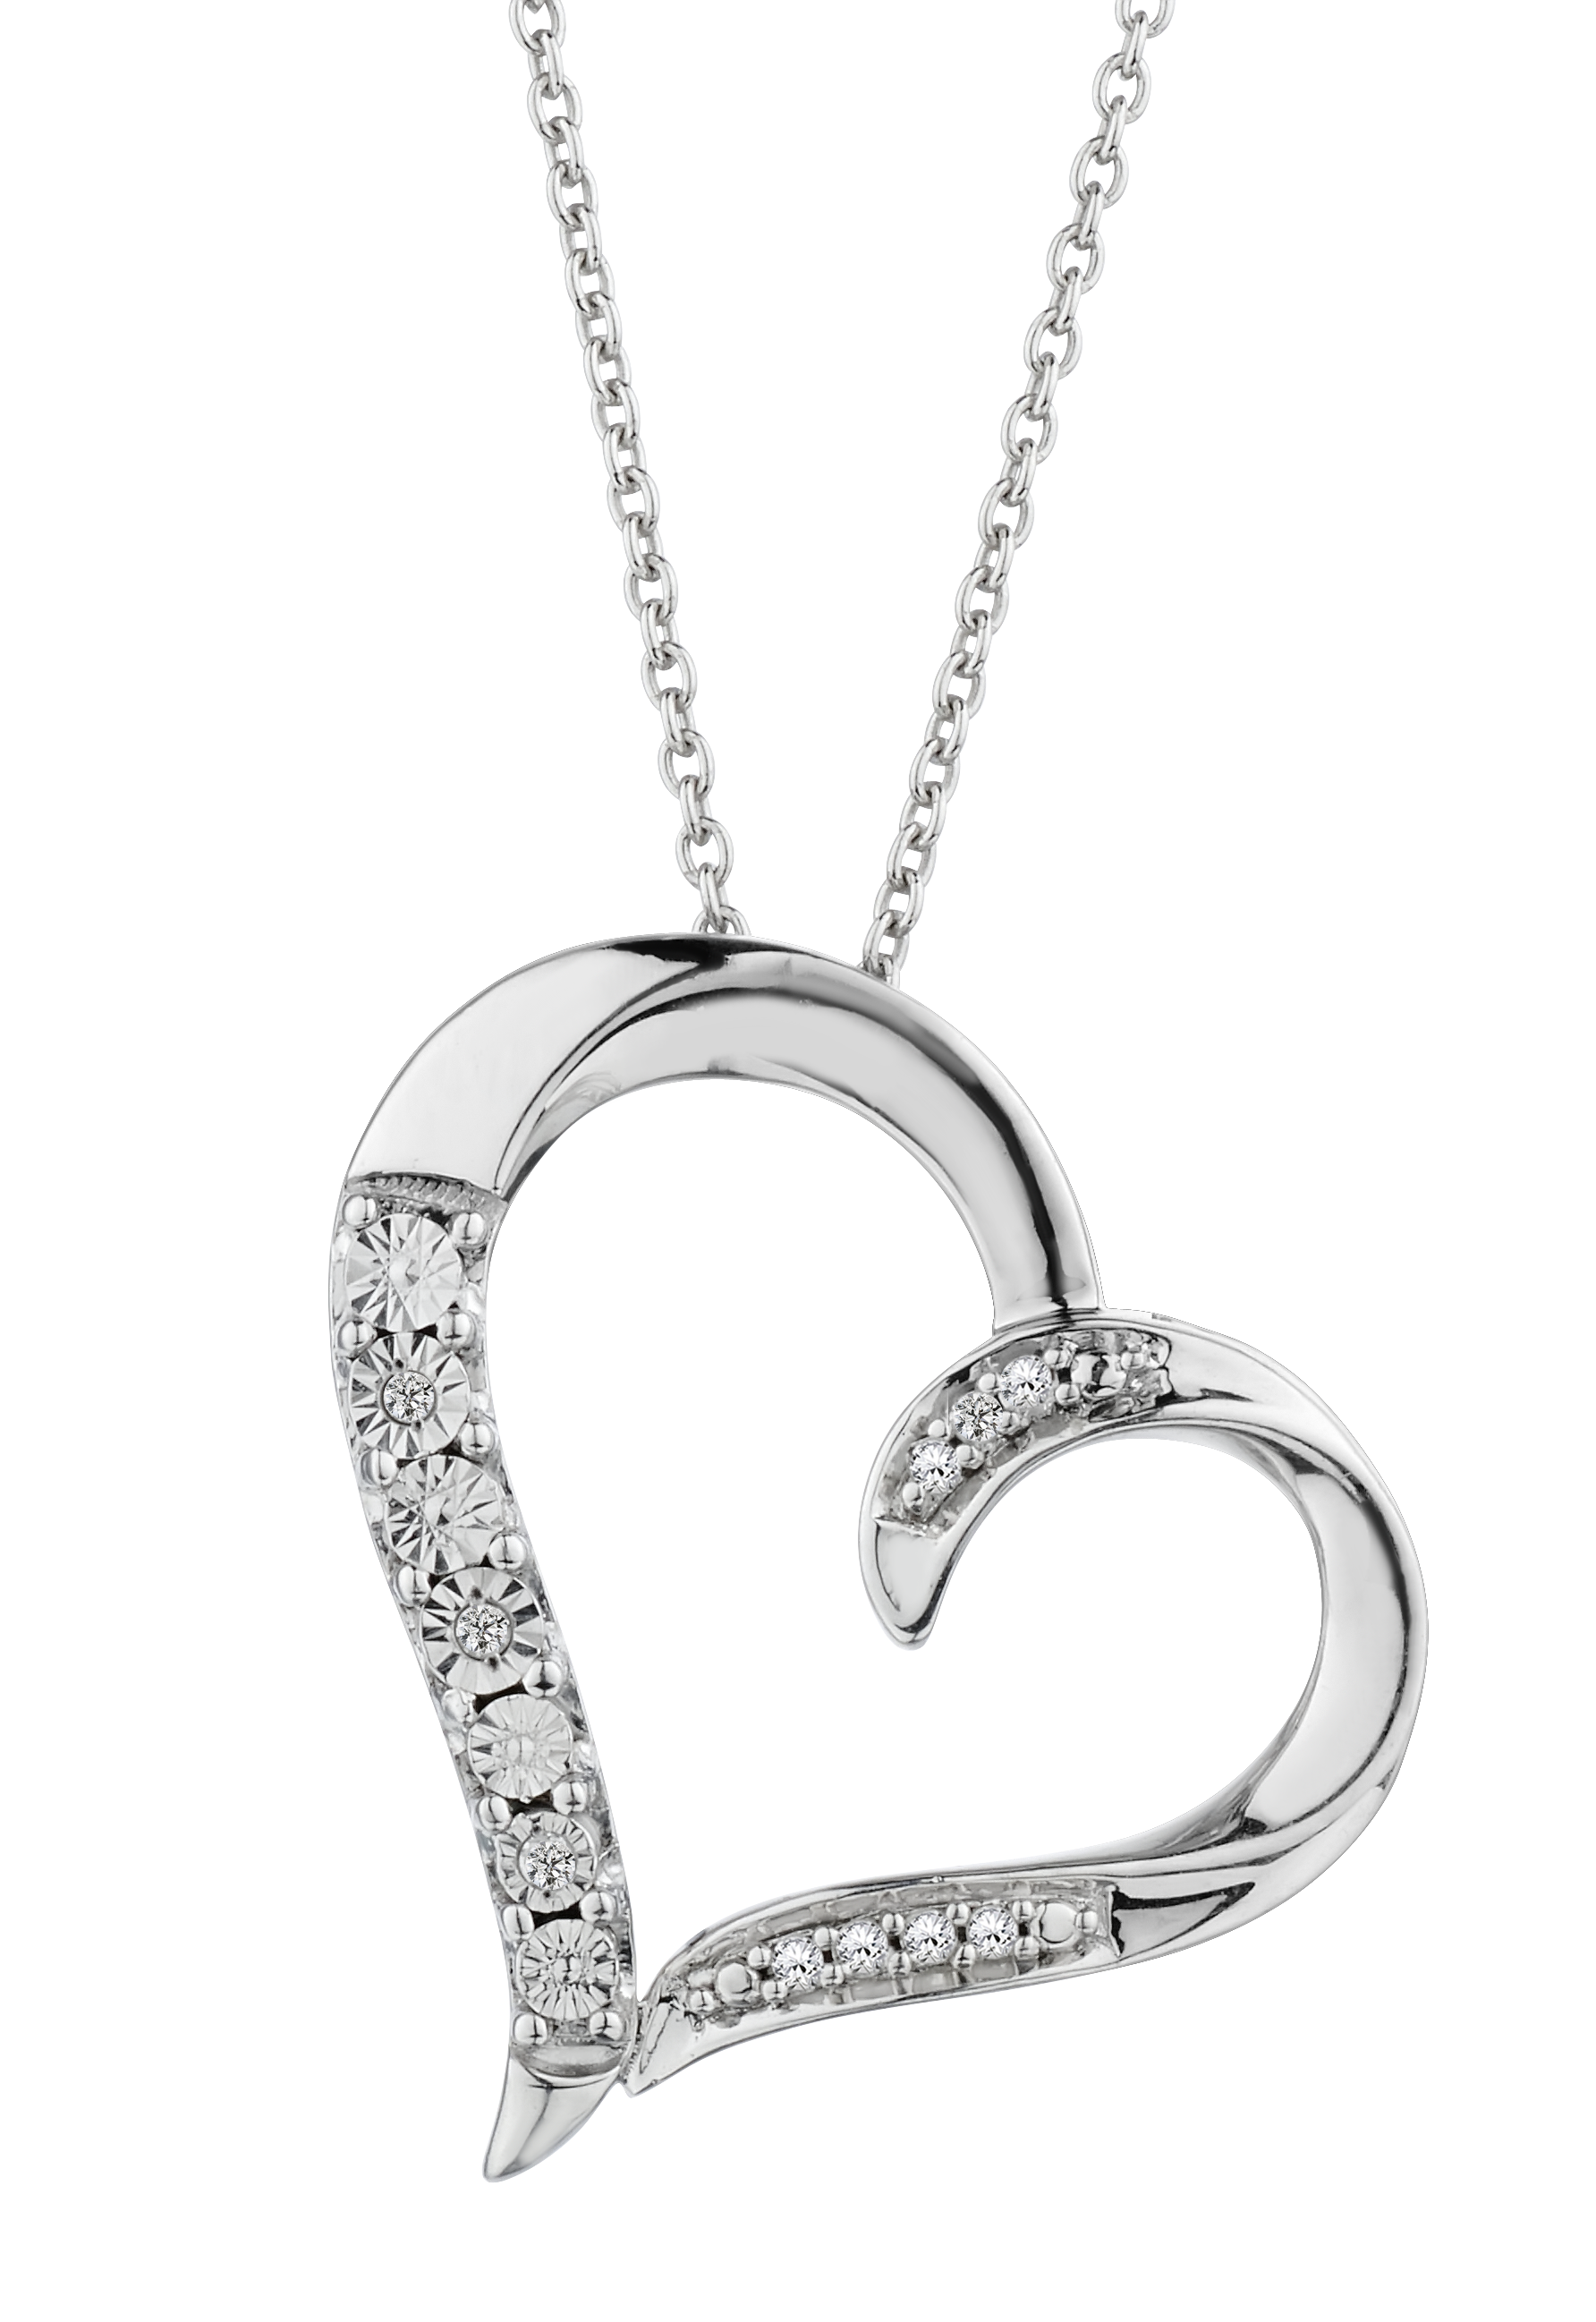 .05 Carat of Diamonds Miracle Heart Pendant, Silver.....................NOW